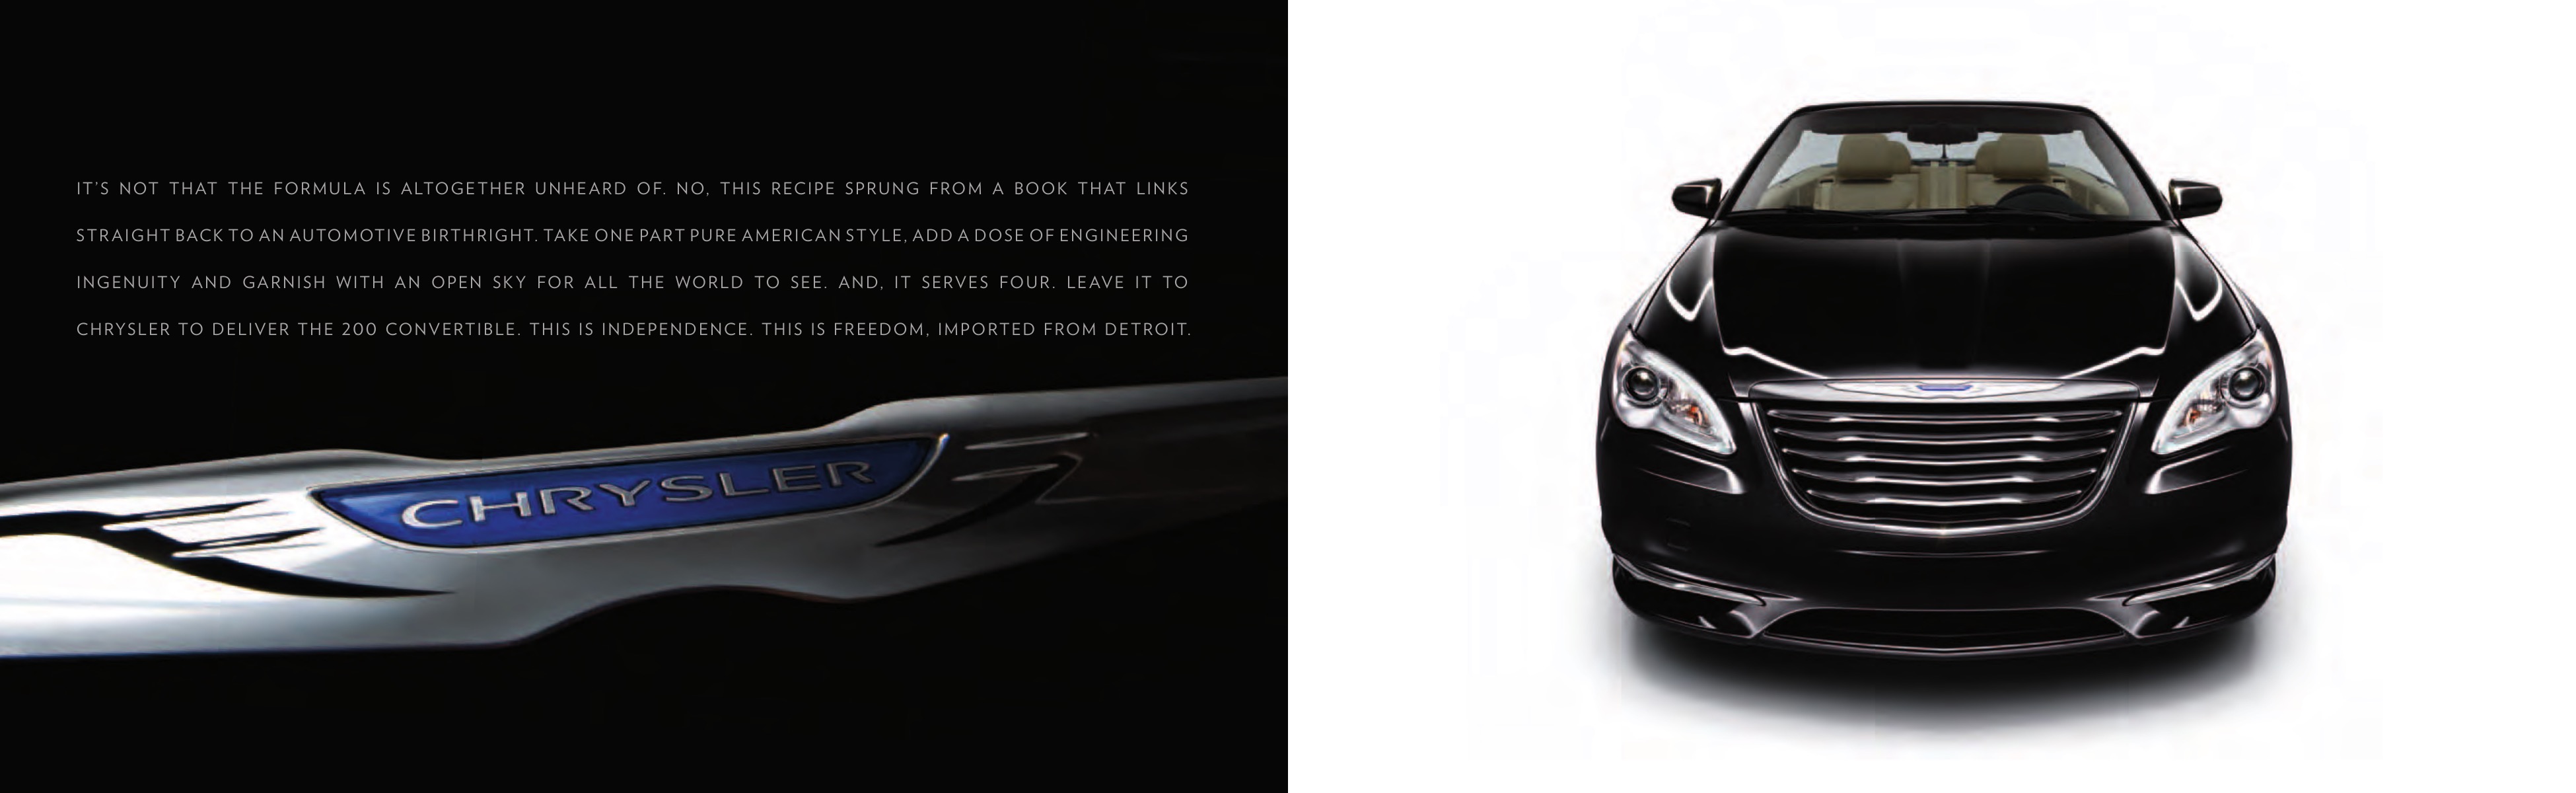 2011 Chrysler 200 Convertible Brochure Page 2